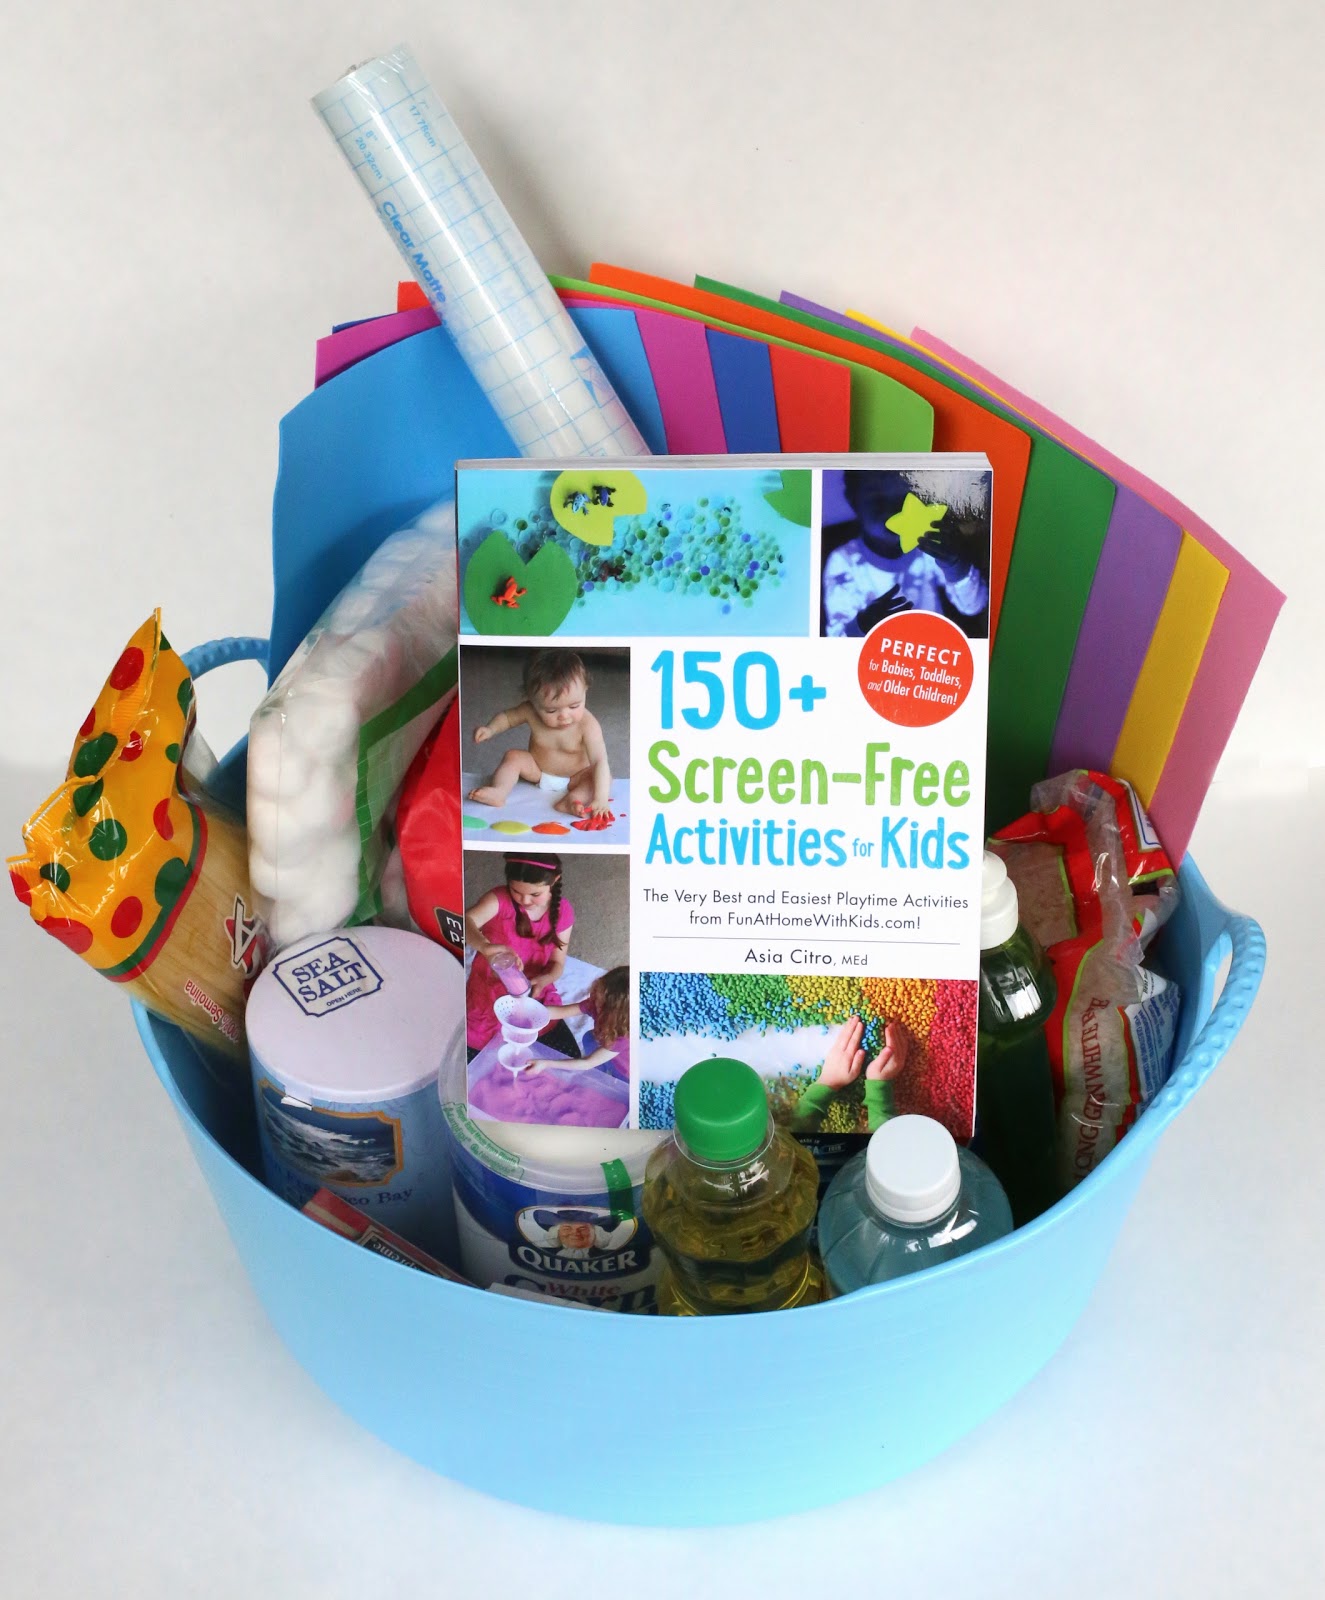 DIY Kits for Creative Gifts:  Ideas for small or large sensory kits for a gift for a friend or classmate, your child's preschool teacher or caregiver, a grandparents house or babysitter's kit, gift basket for a fundraising auction, birthday party or baby shower gift!  From Fun at Home with Kids